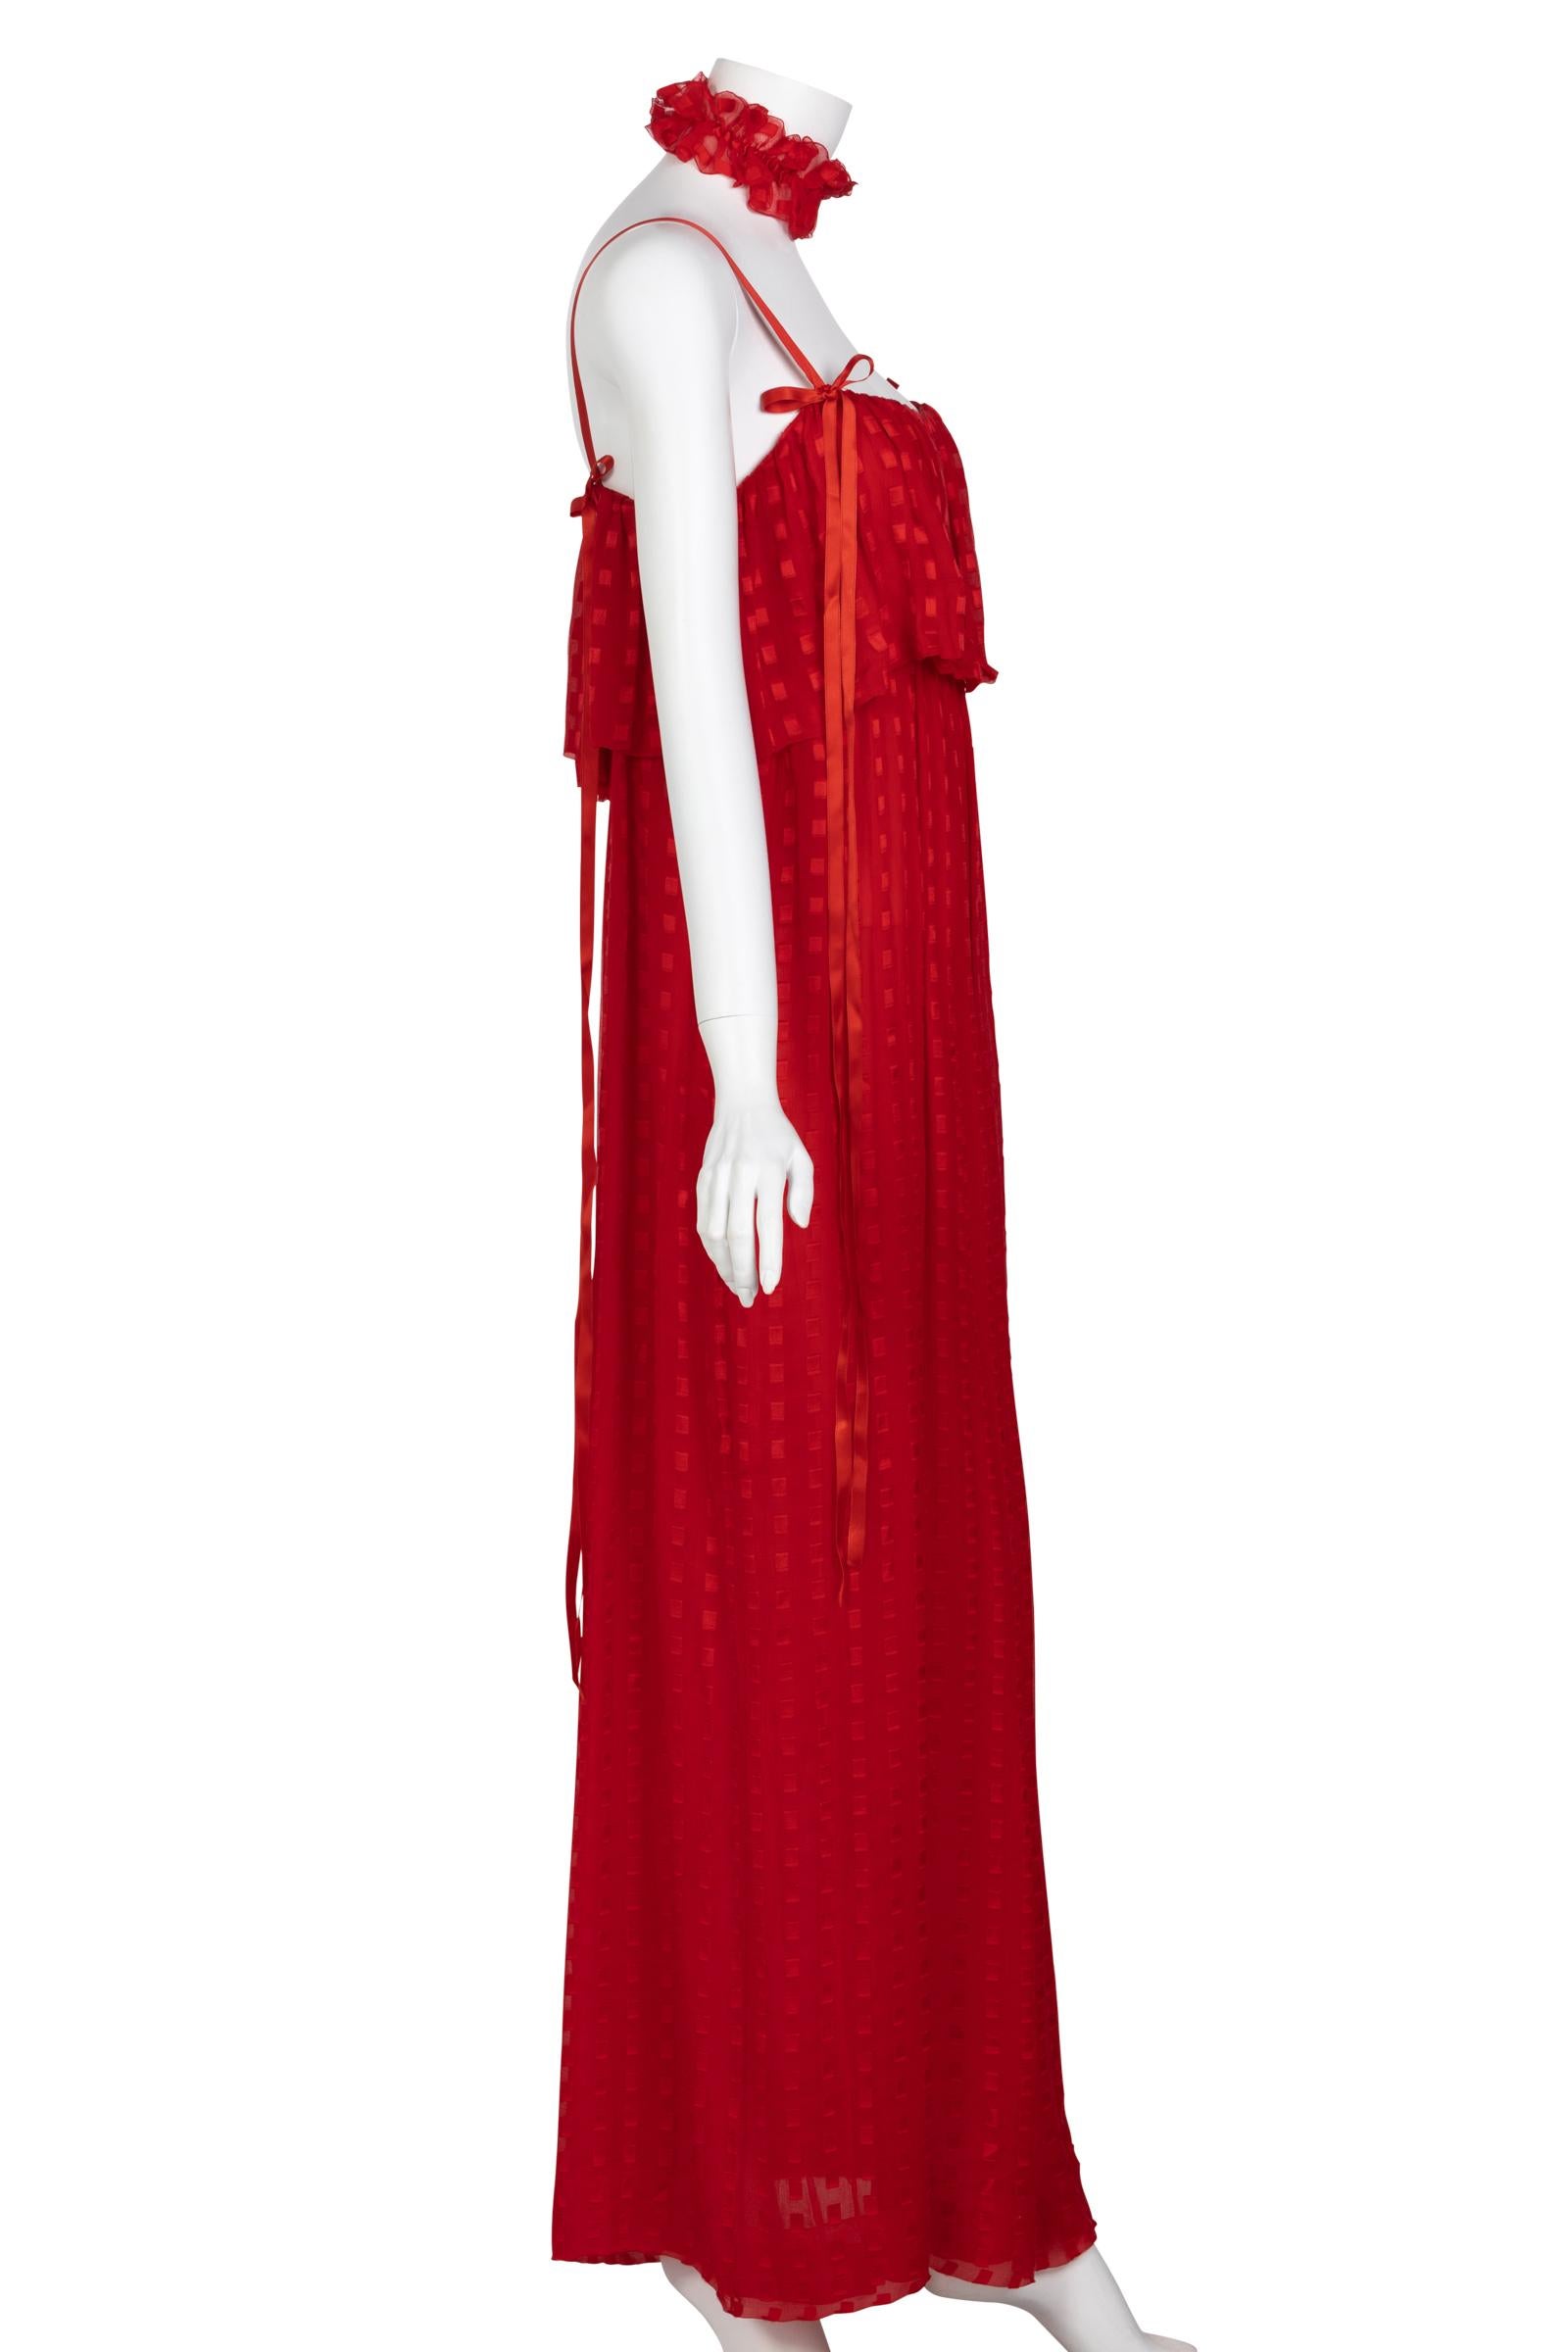 Christian Dior Red Maxi Dress & Shawl Documented 1970s 1